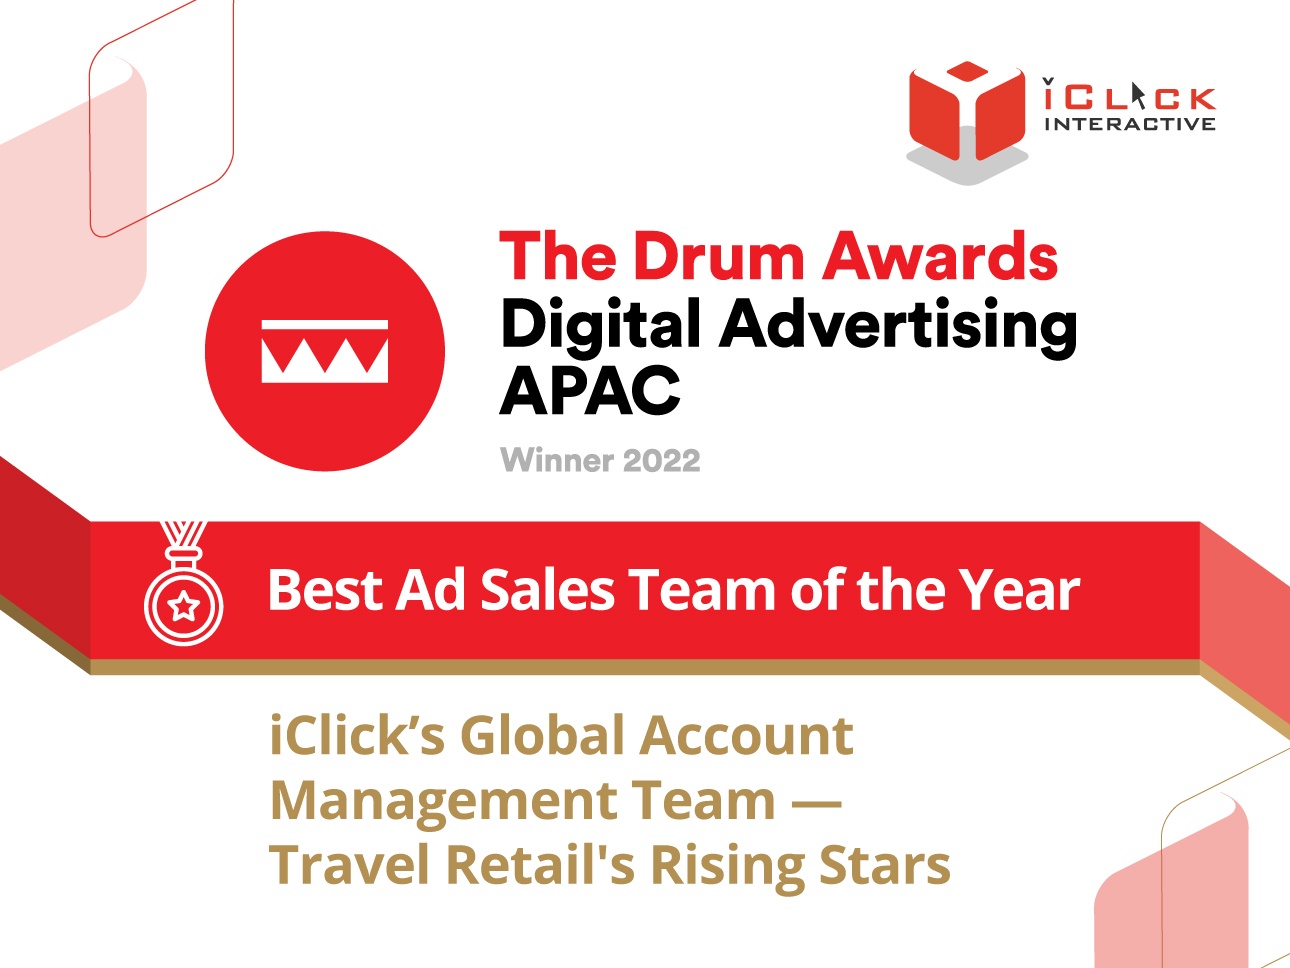 iClick’s GAM Team Wins The “Best Ad Sales Team of the Year” at The Drum Awards for Digital Advertising APAC 2022!